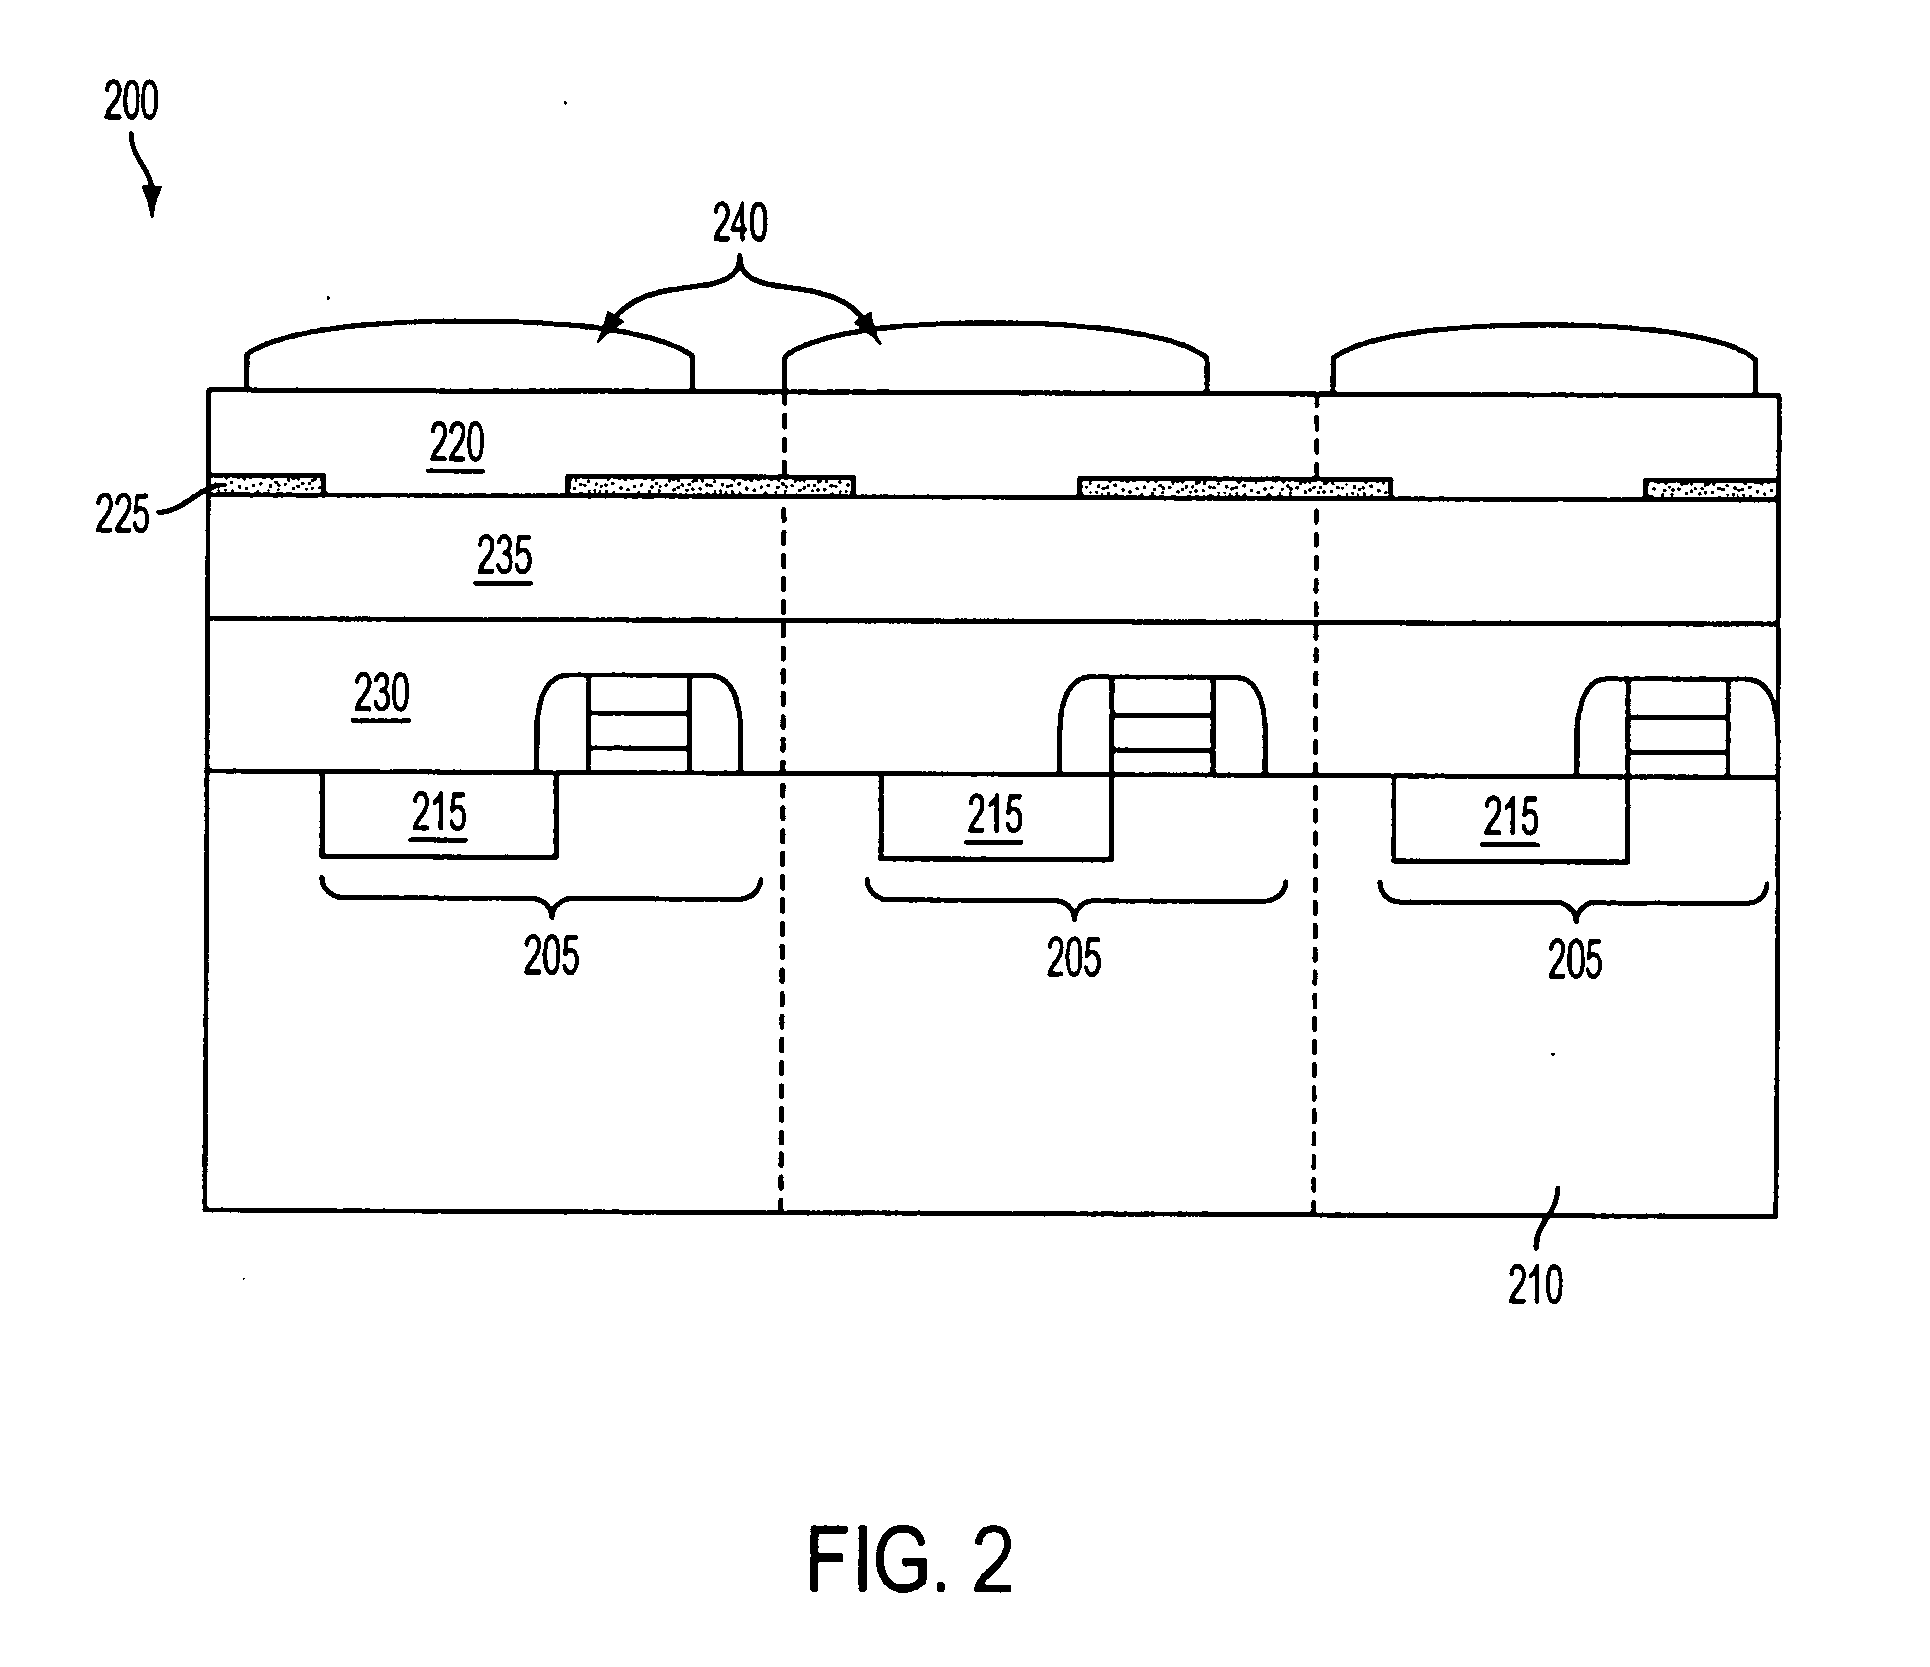 Method and apparatus providing color interpolation in color filter arrays using edge detection and correction terms